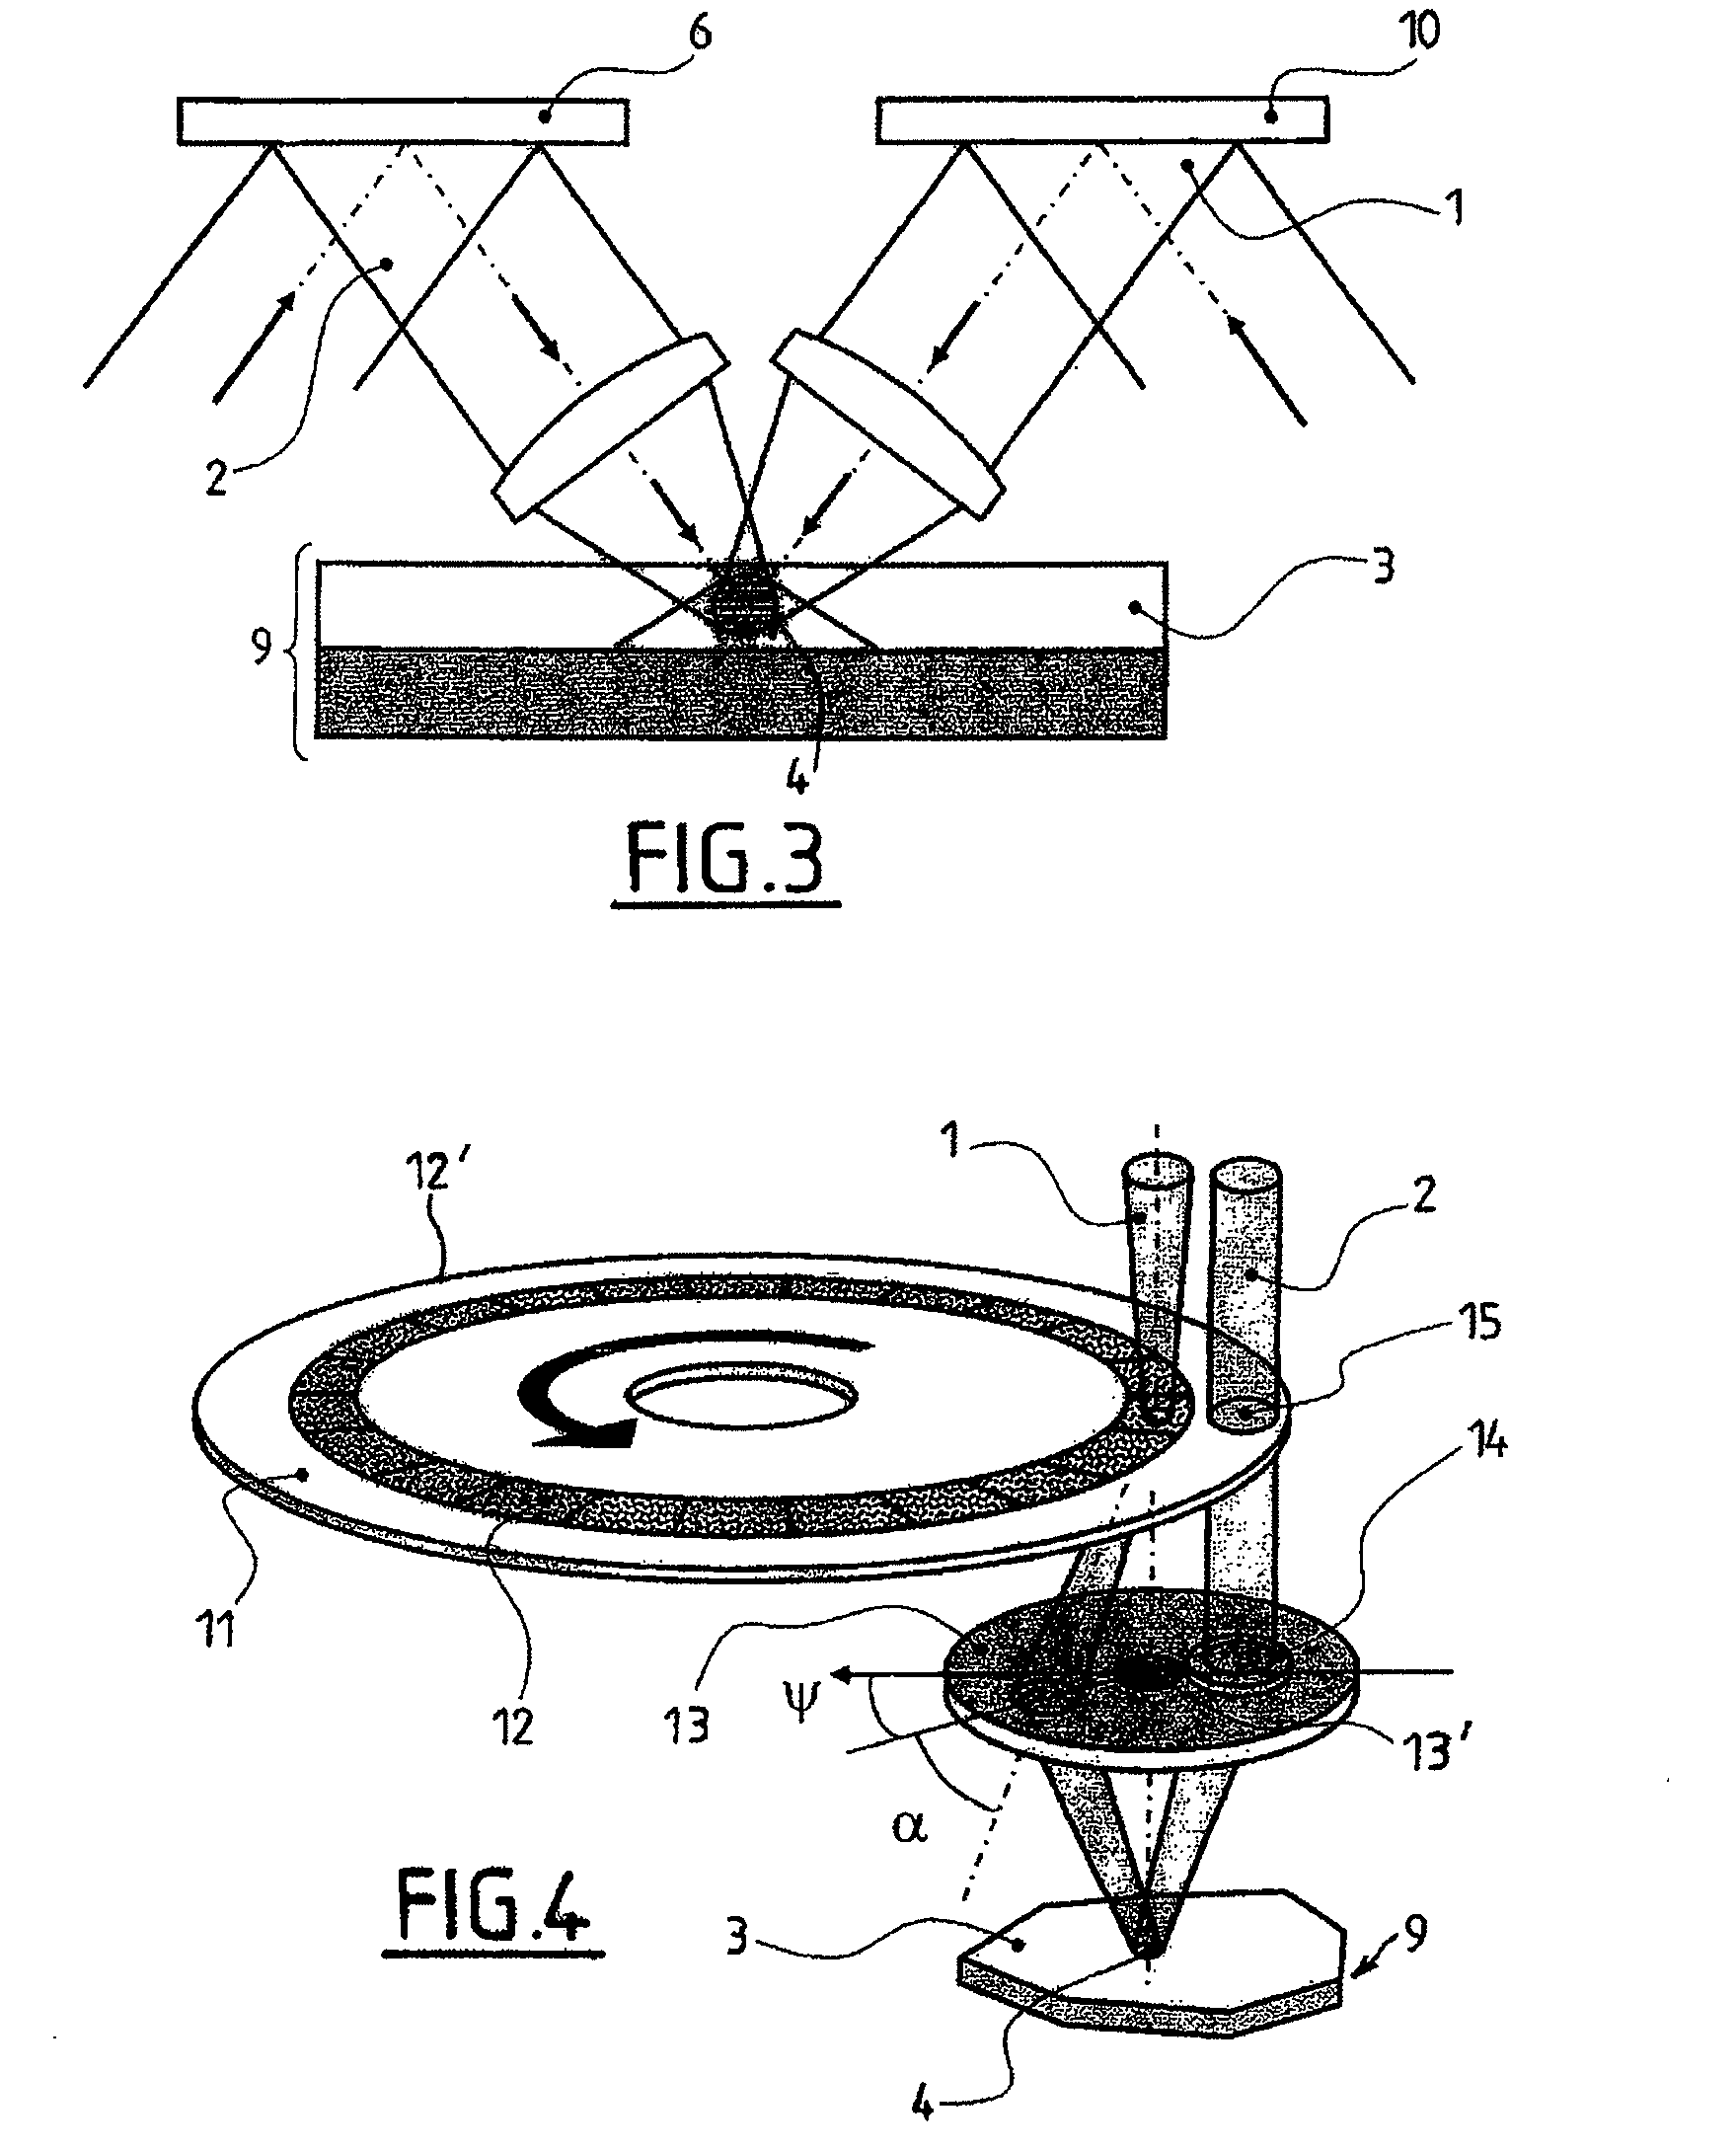 Devices for storing and reading data on a holographic storage medium